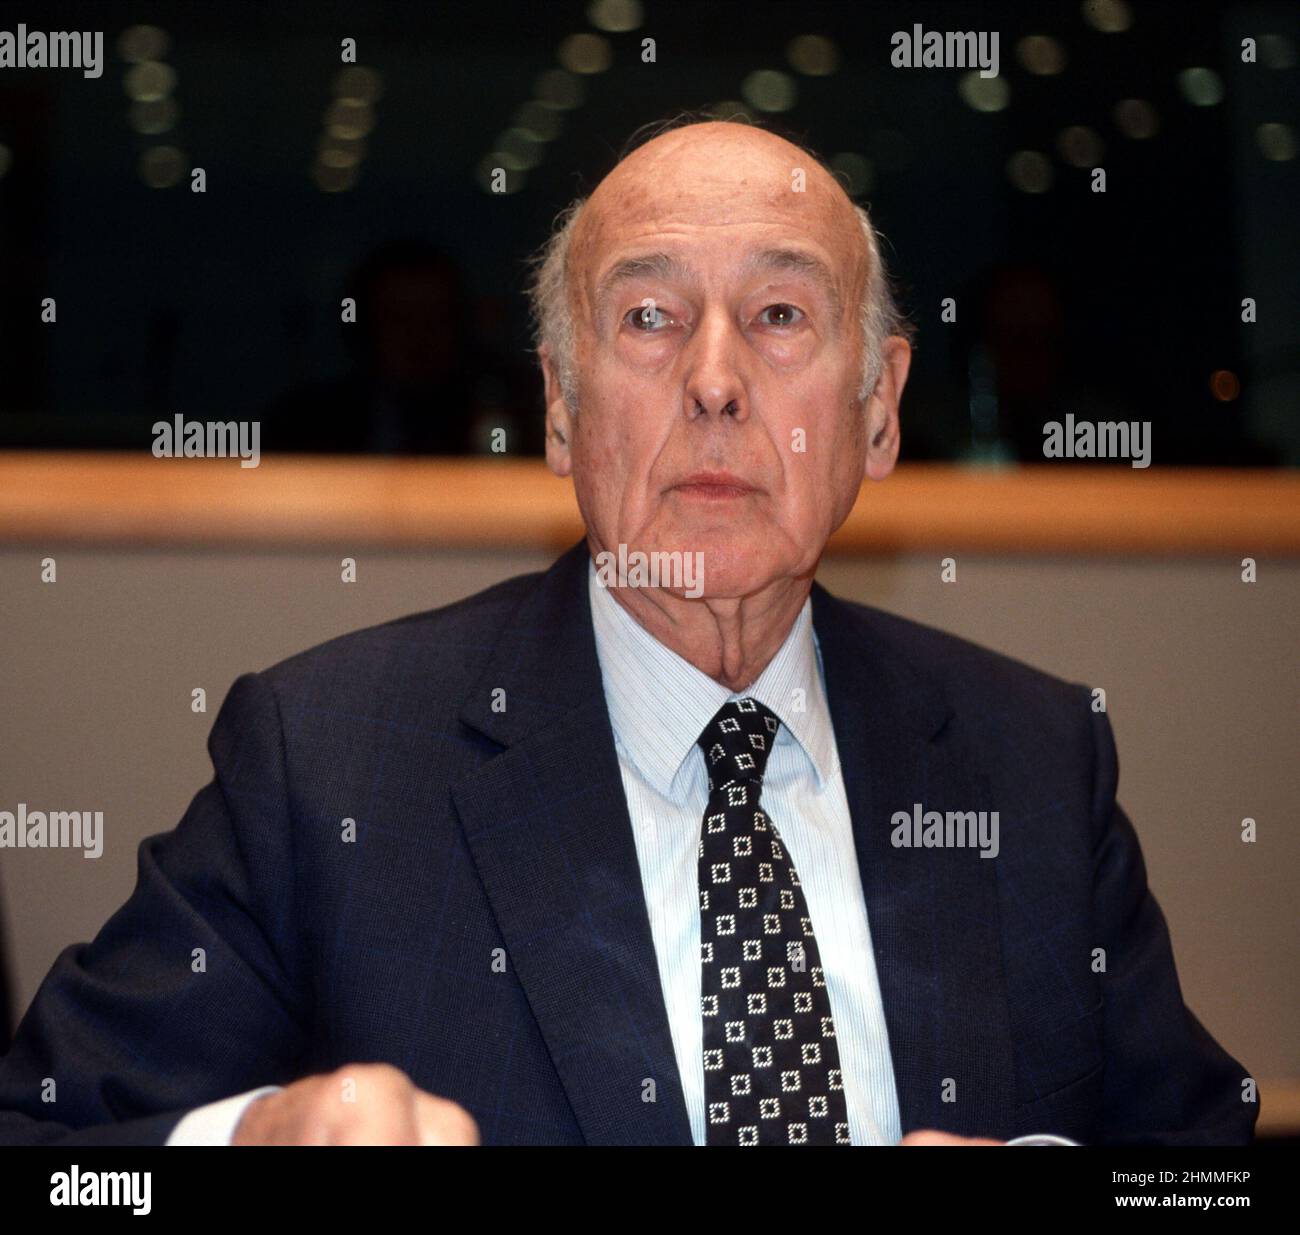 Belgium, Brussels, on March 23, 2002: Valry Giscard d'Estaing, President of the European Convention, attending a Conference on the Future of Europe where a Treaty Establishing a Constitution for Europe was to be agreed. Stock Photo